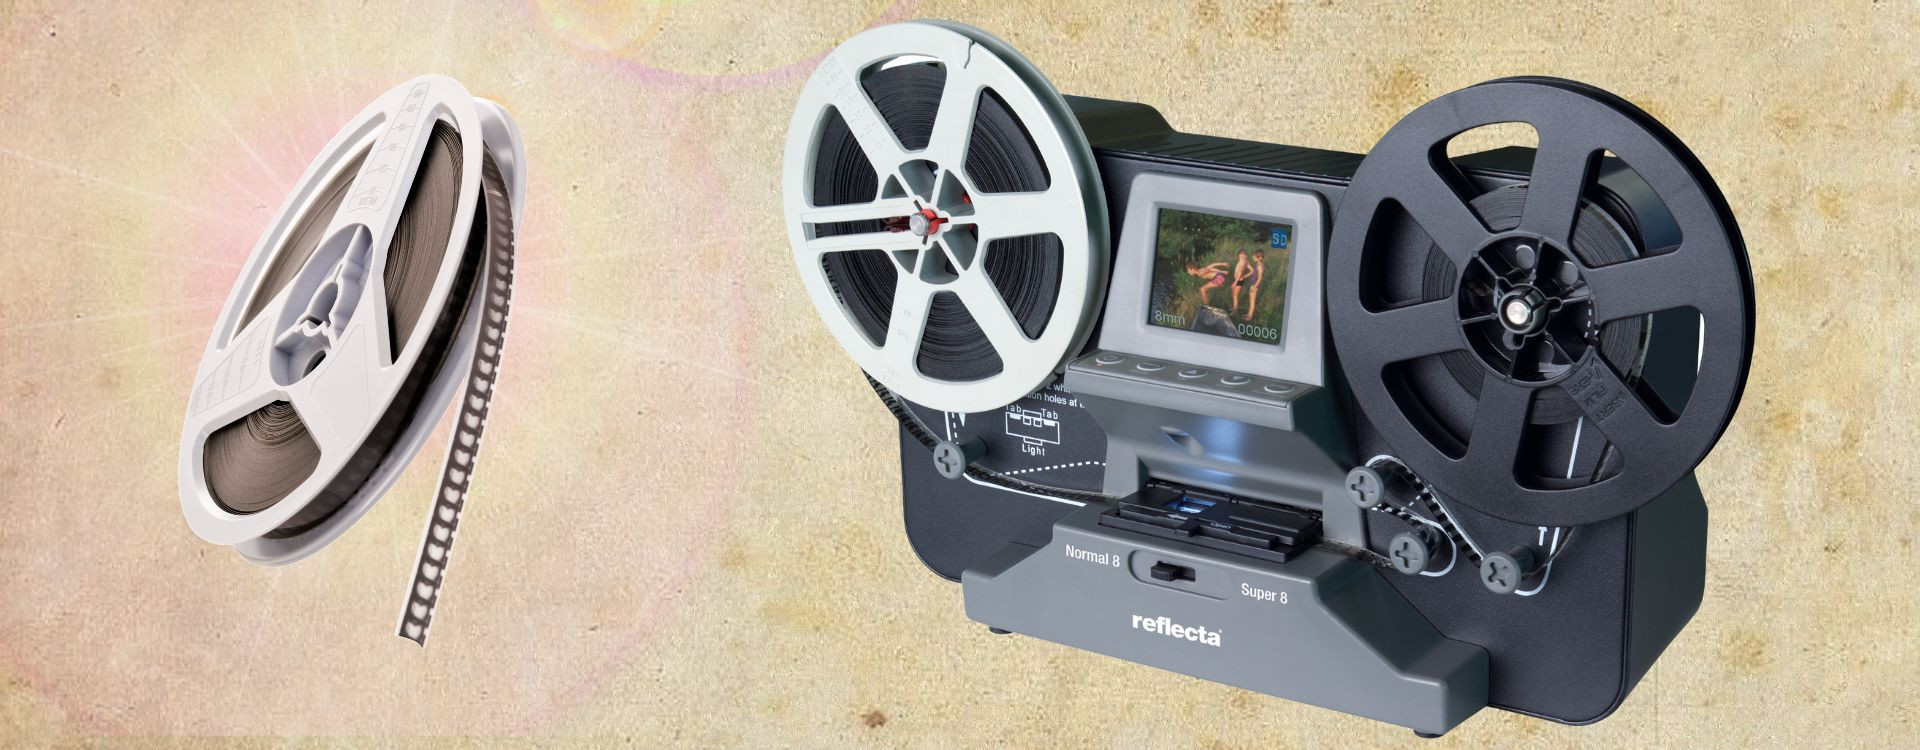 Preserve analog treasures: Discover the reflecta Film Scanner for Super 8  and Normal 8 Films